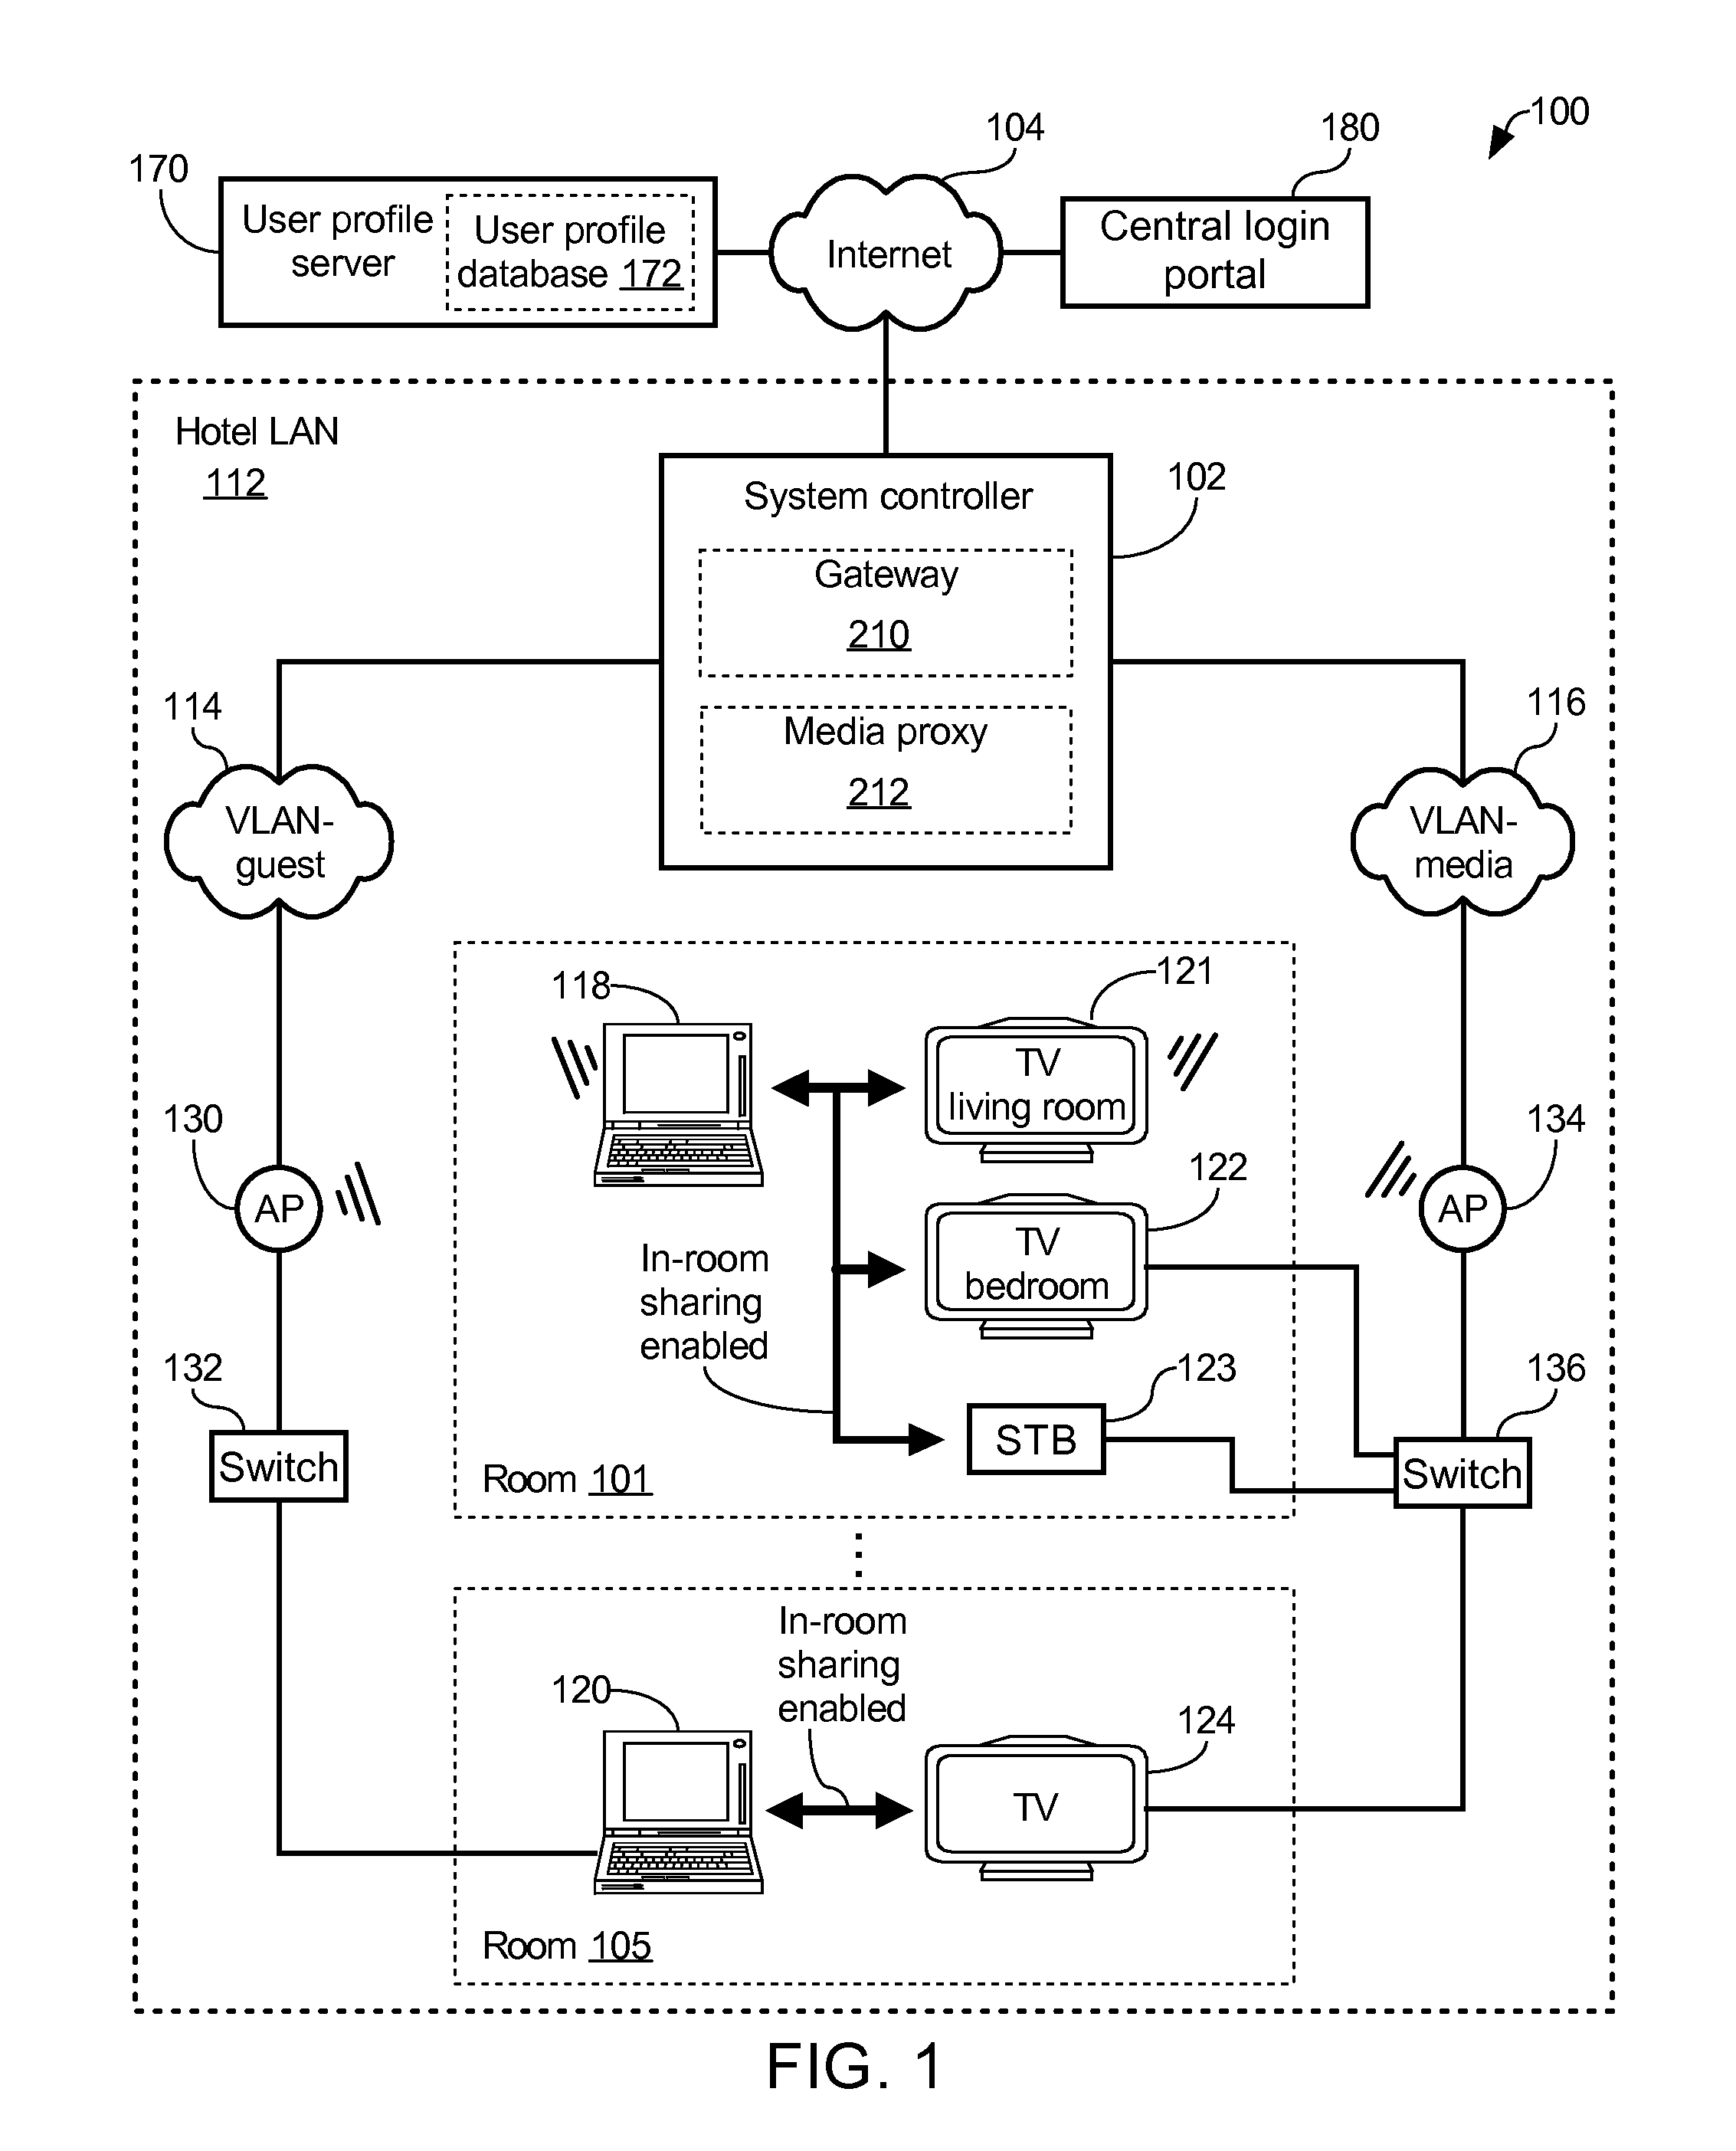 Dynamic assignment of central media device supporting network-based media sharing protocol to guest device of hospitality establishment for media sharing purposes